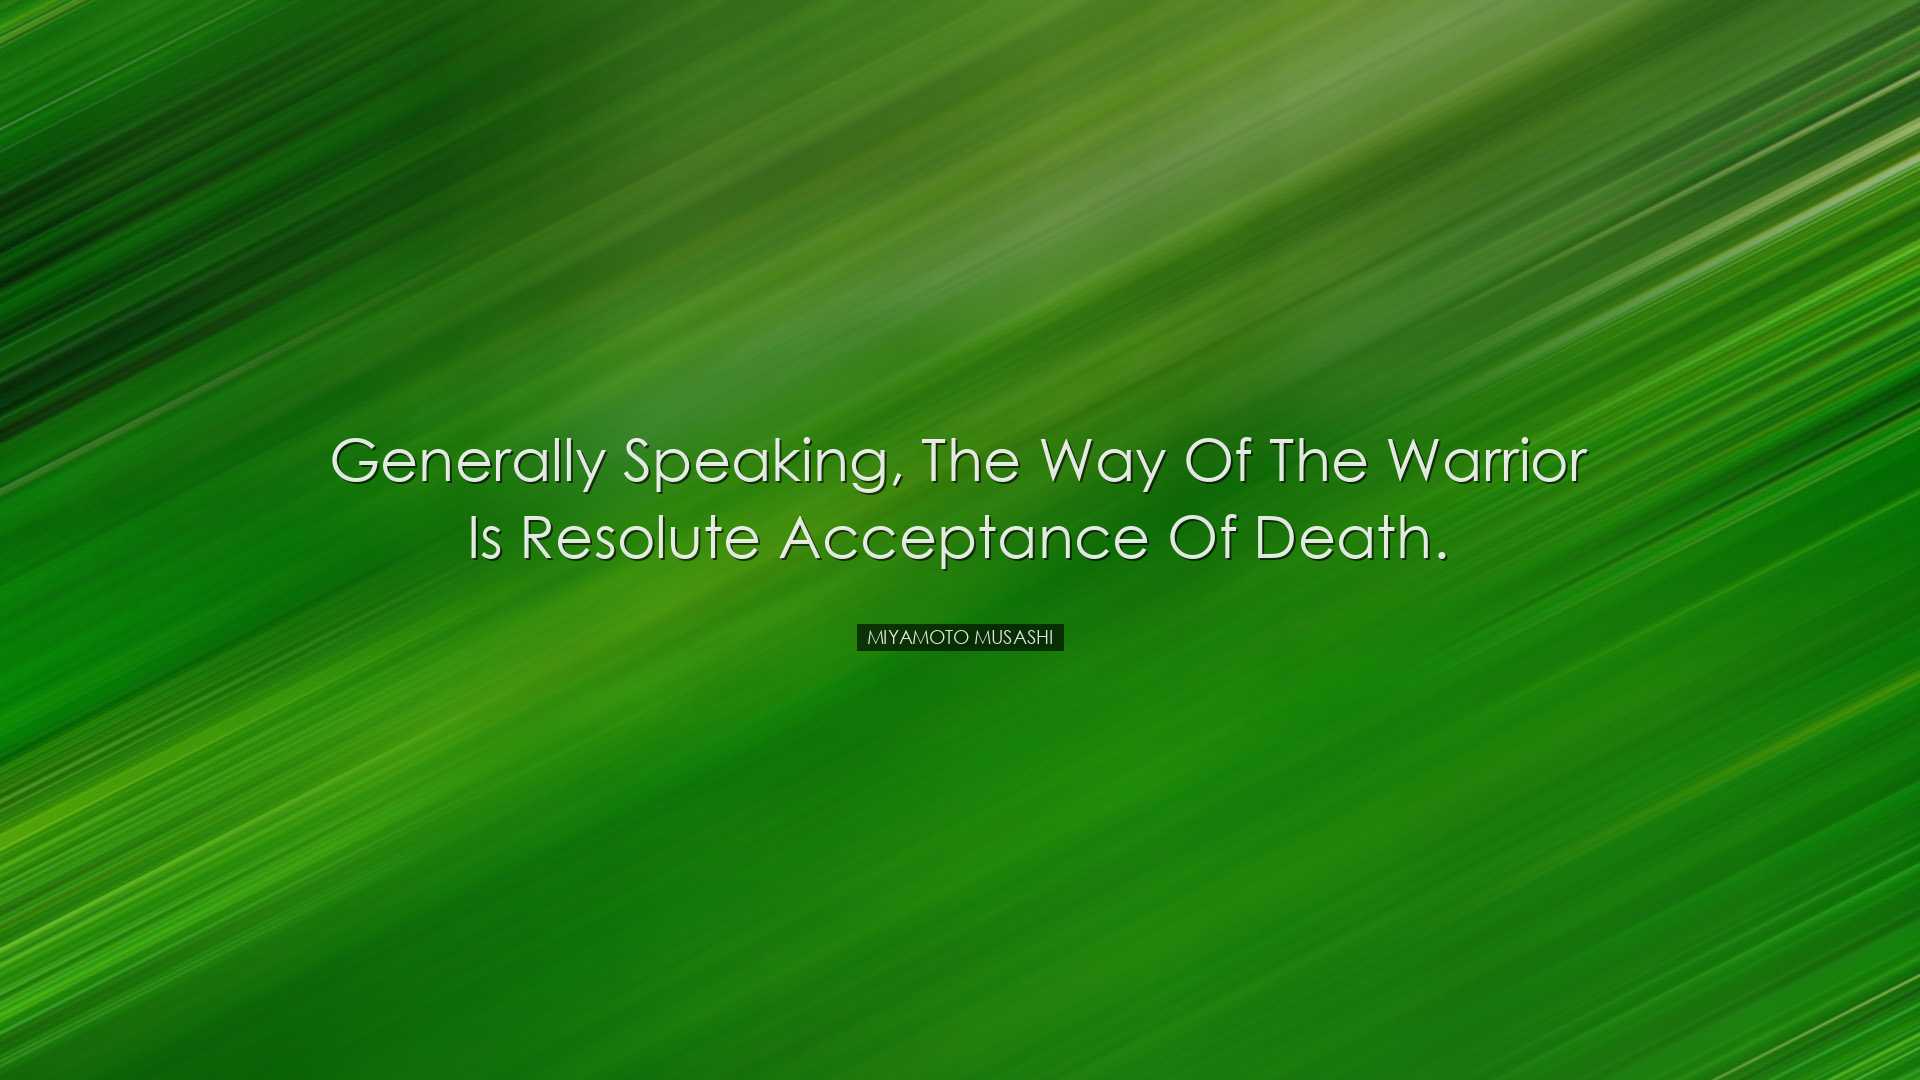 Generally speaking, the Way of the warrior is resolute acceptance